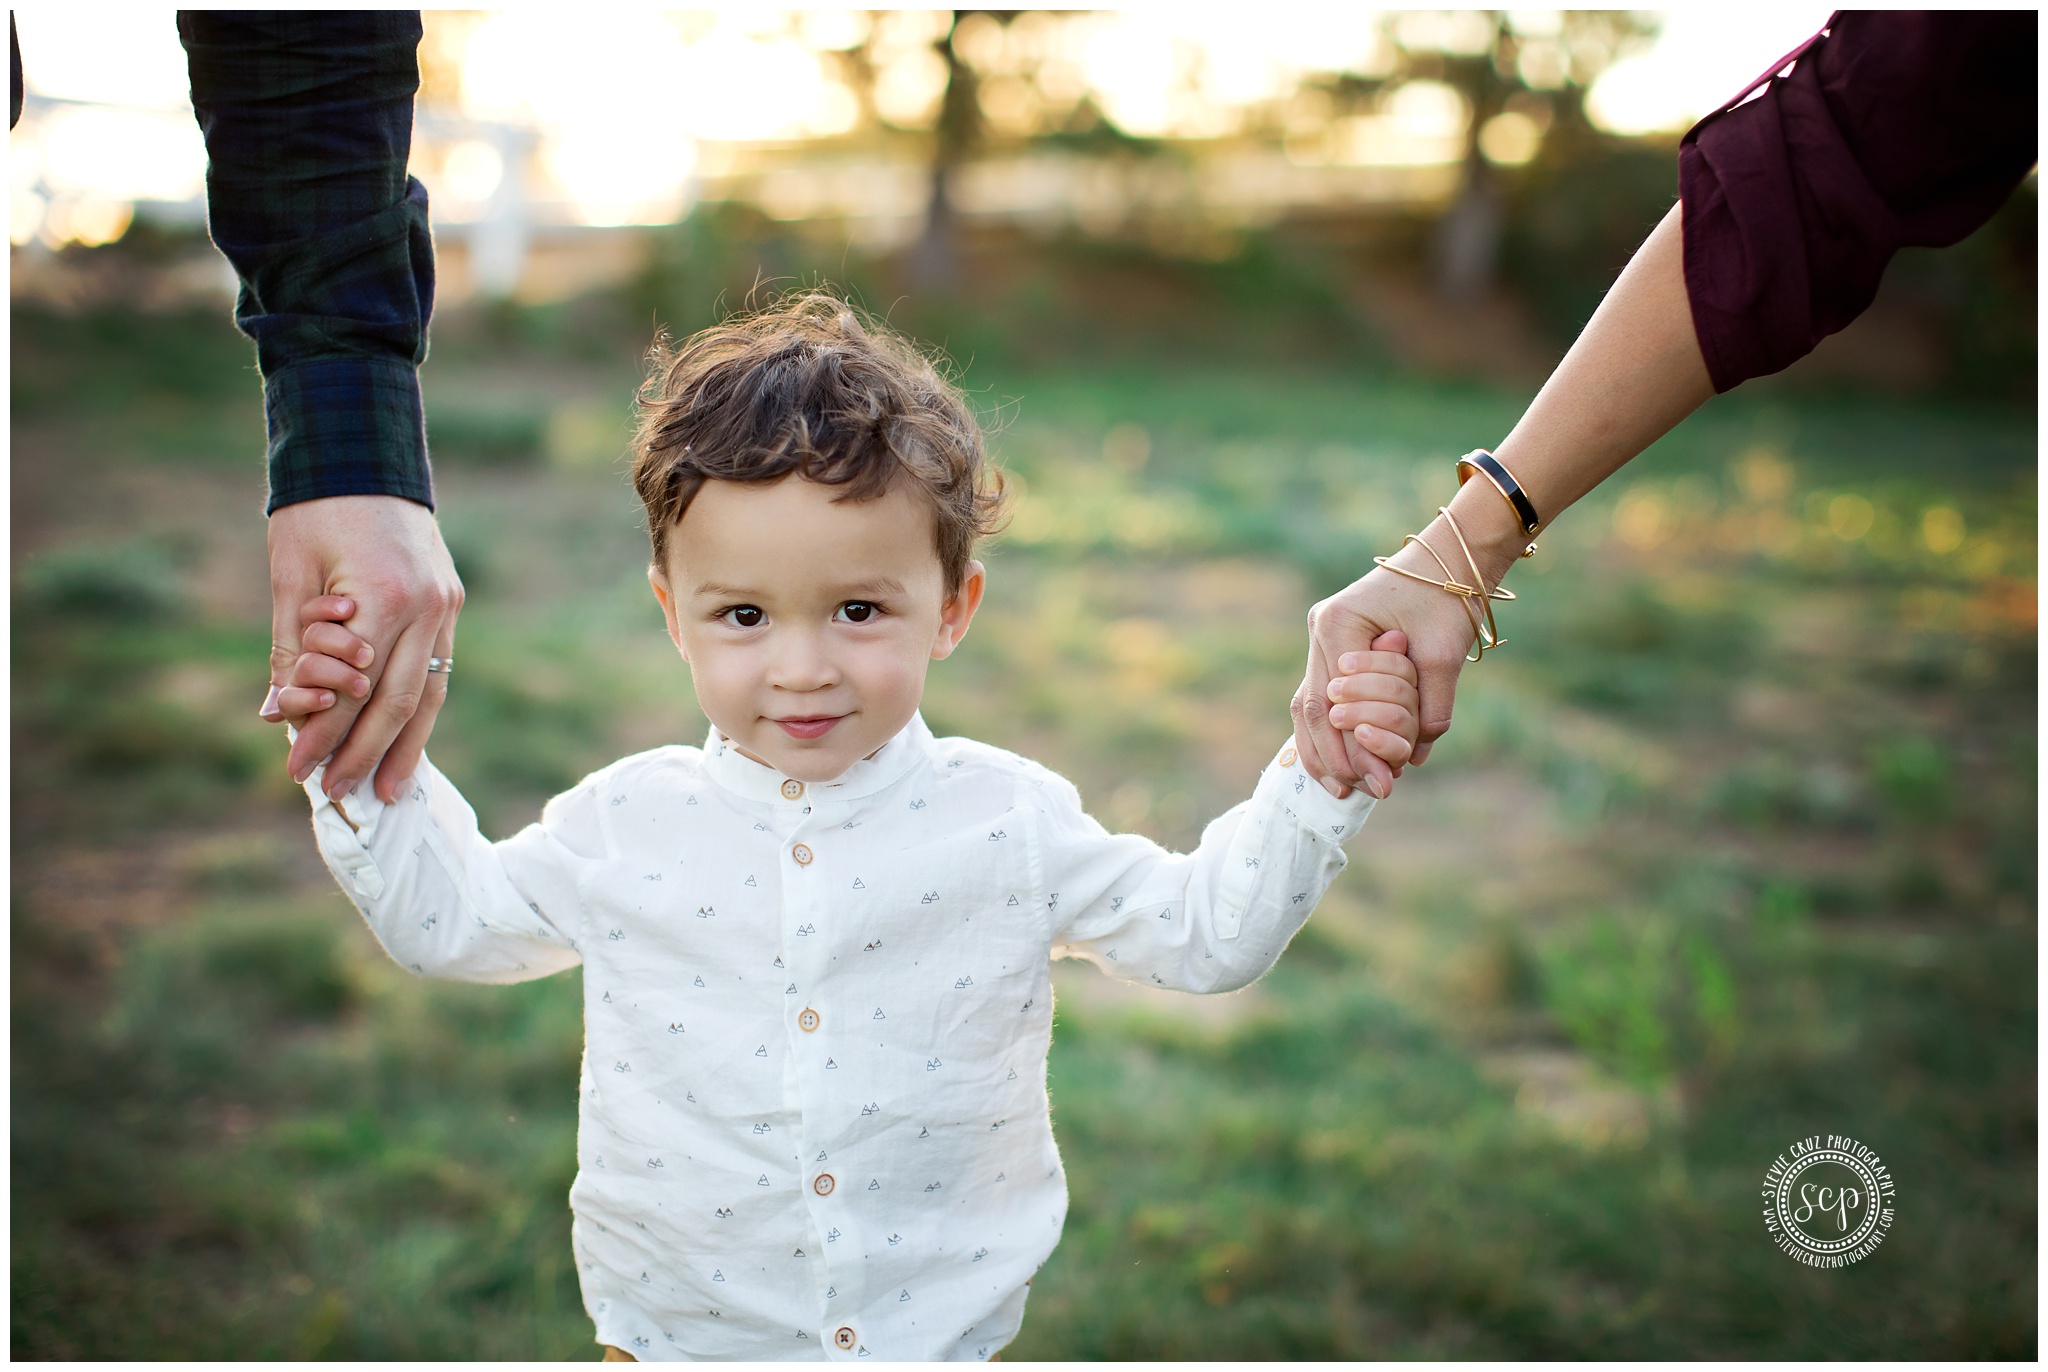 Orange County captures sweet candid moments of toddler boy during family pictures